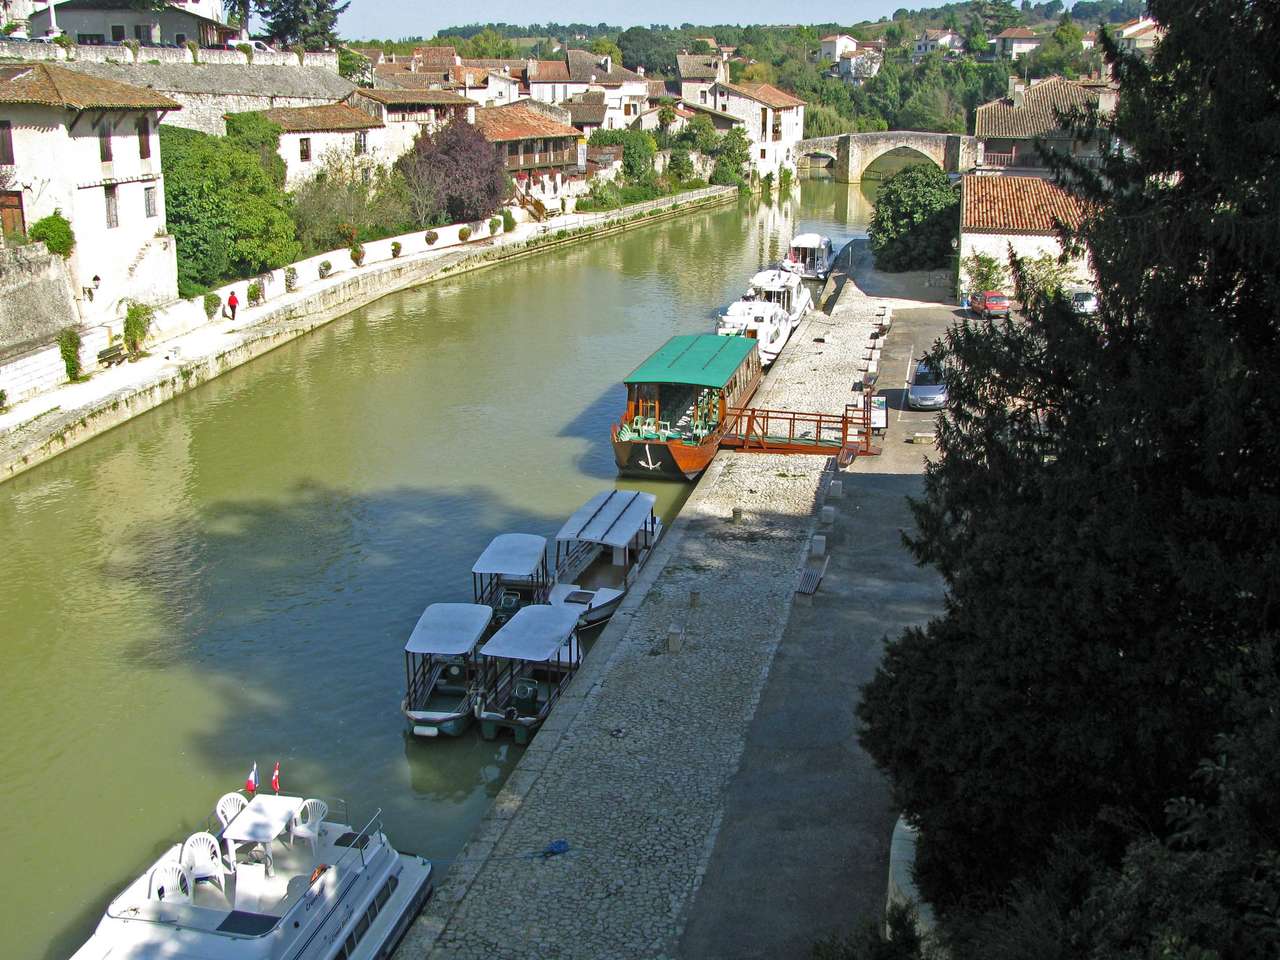 The Baïse in Nérac jigsaw puzzle online